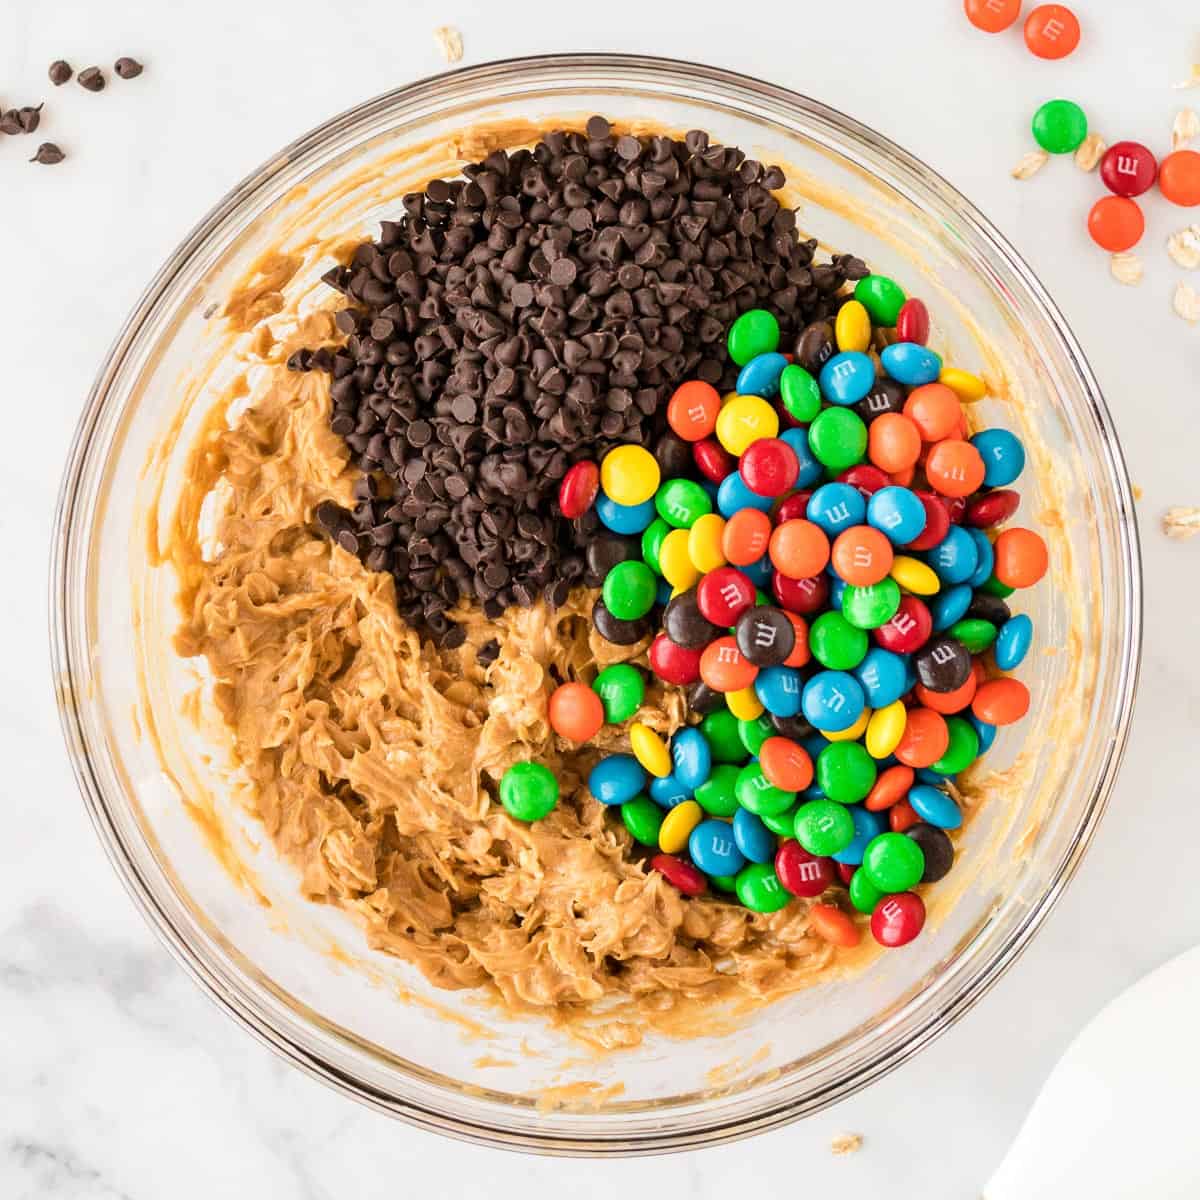 adding mini chocolate chips and m & m's to the cookie batter